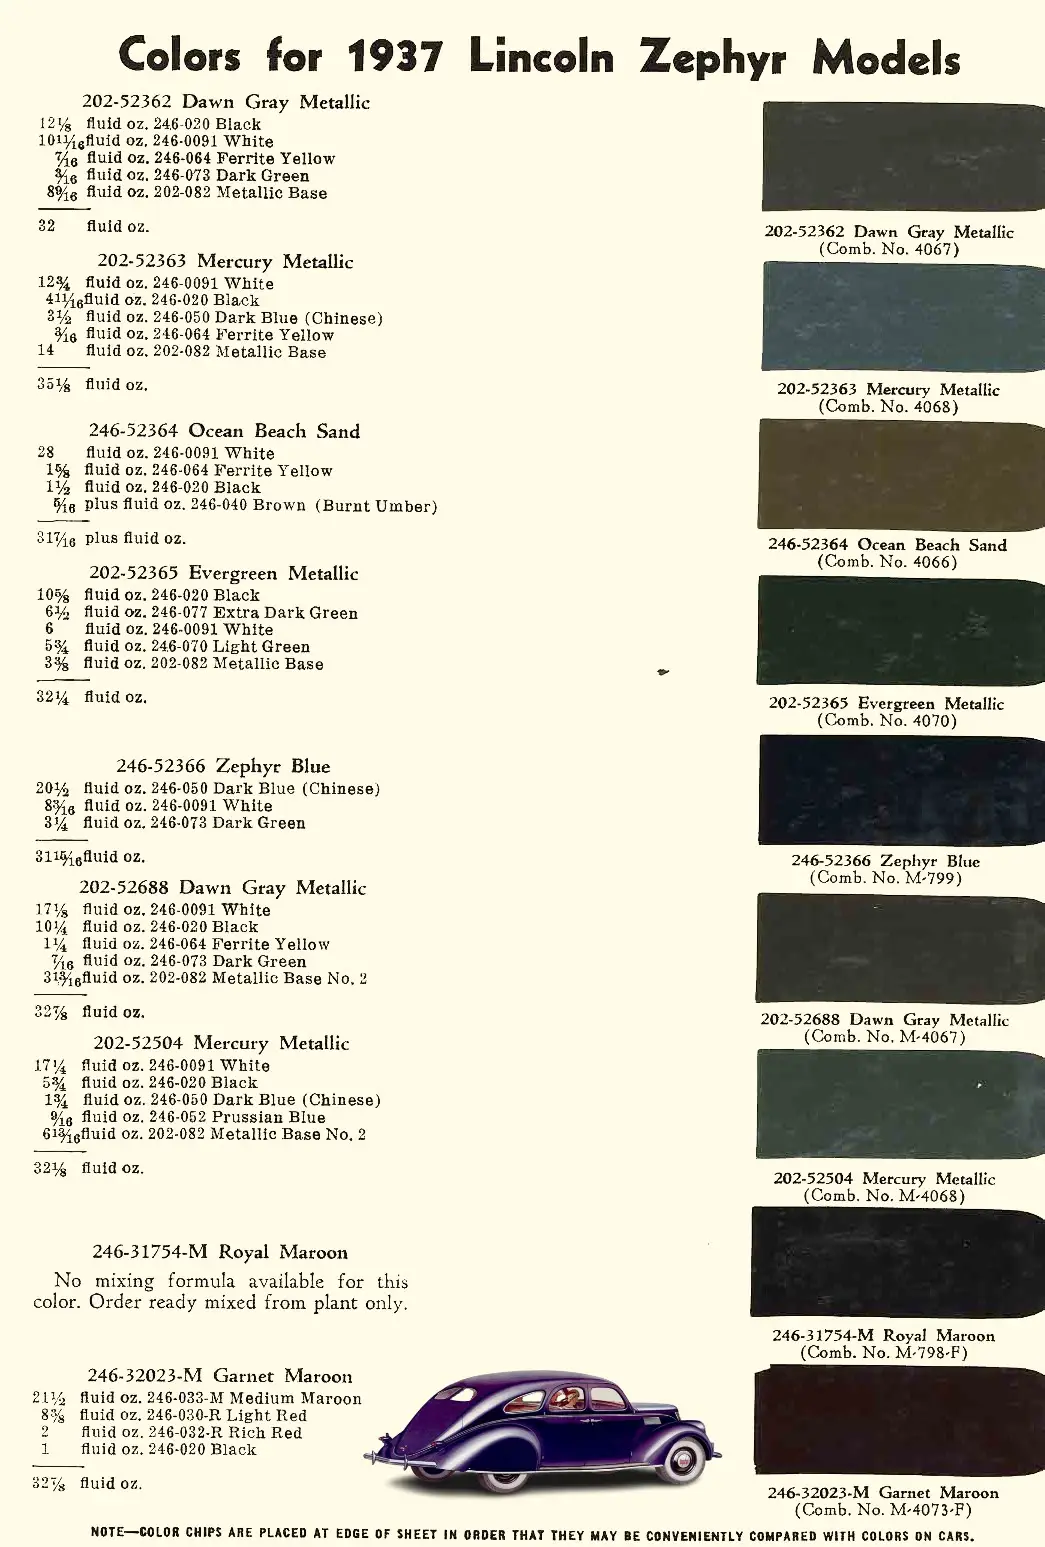 Paint Codes, paint swatches, and mixing formulas for 1937 Lincoln vehicles